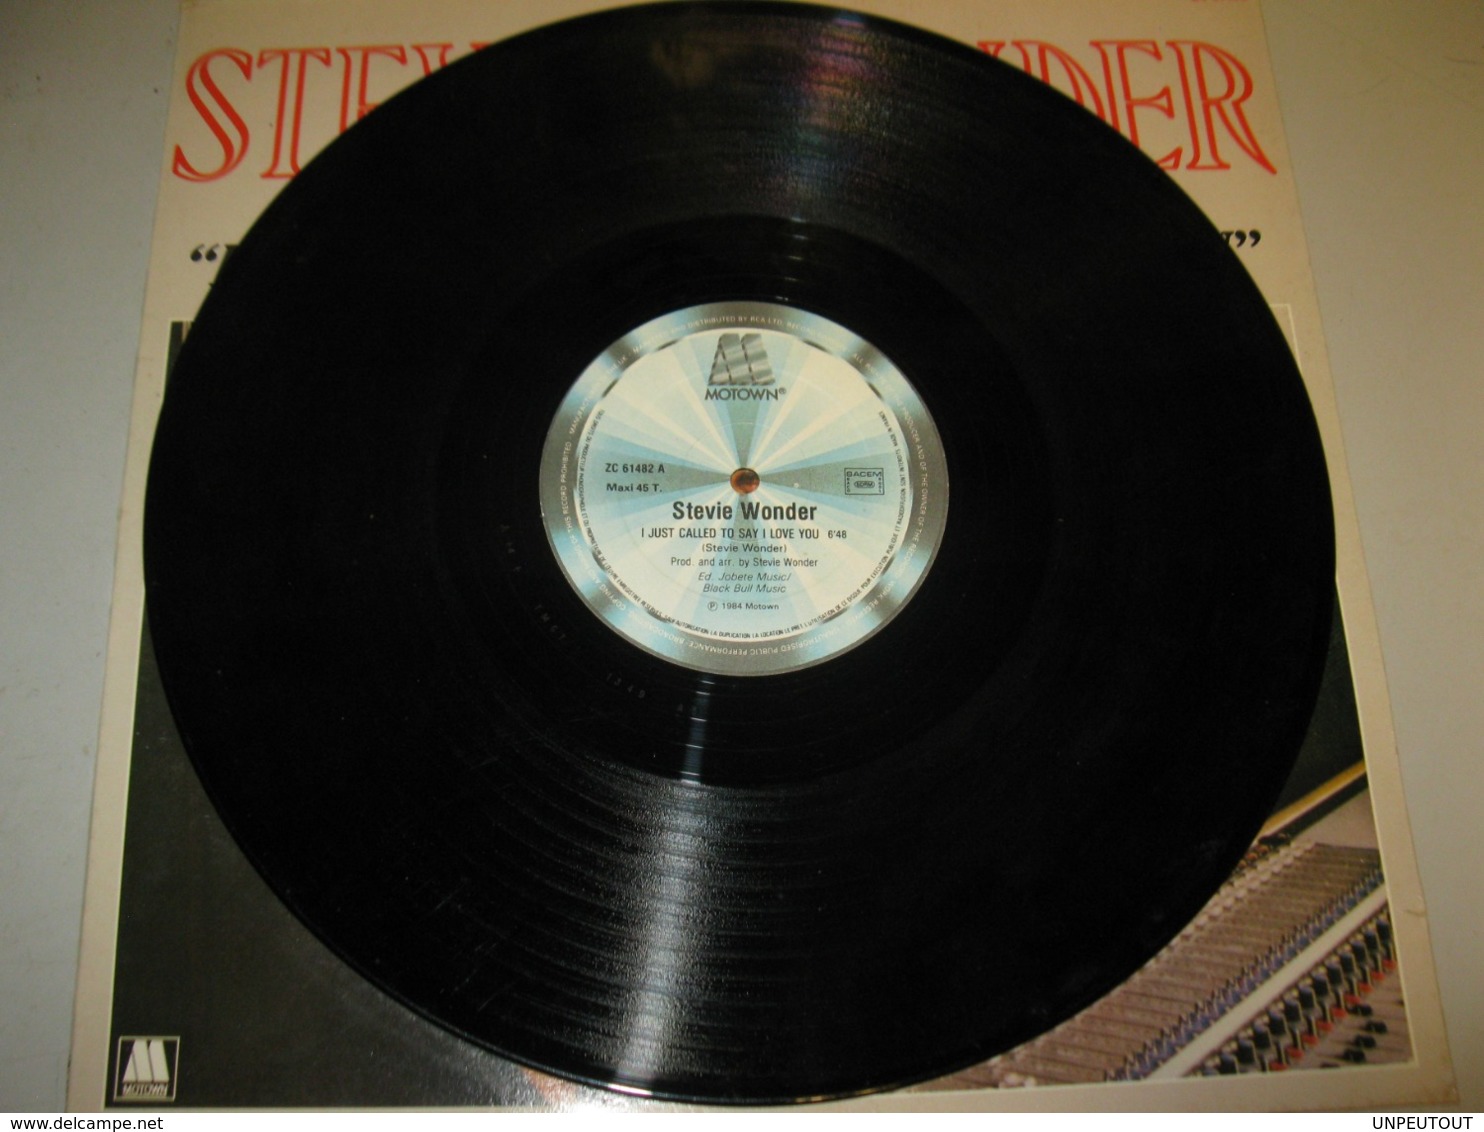 STEVIE WONDER "I JUST CALLED TO SAY I LOVE YOU" MAXI 45 T MOTOWN / RCA (1984) - 45 Rpm - Maxi-Singles